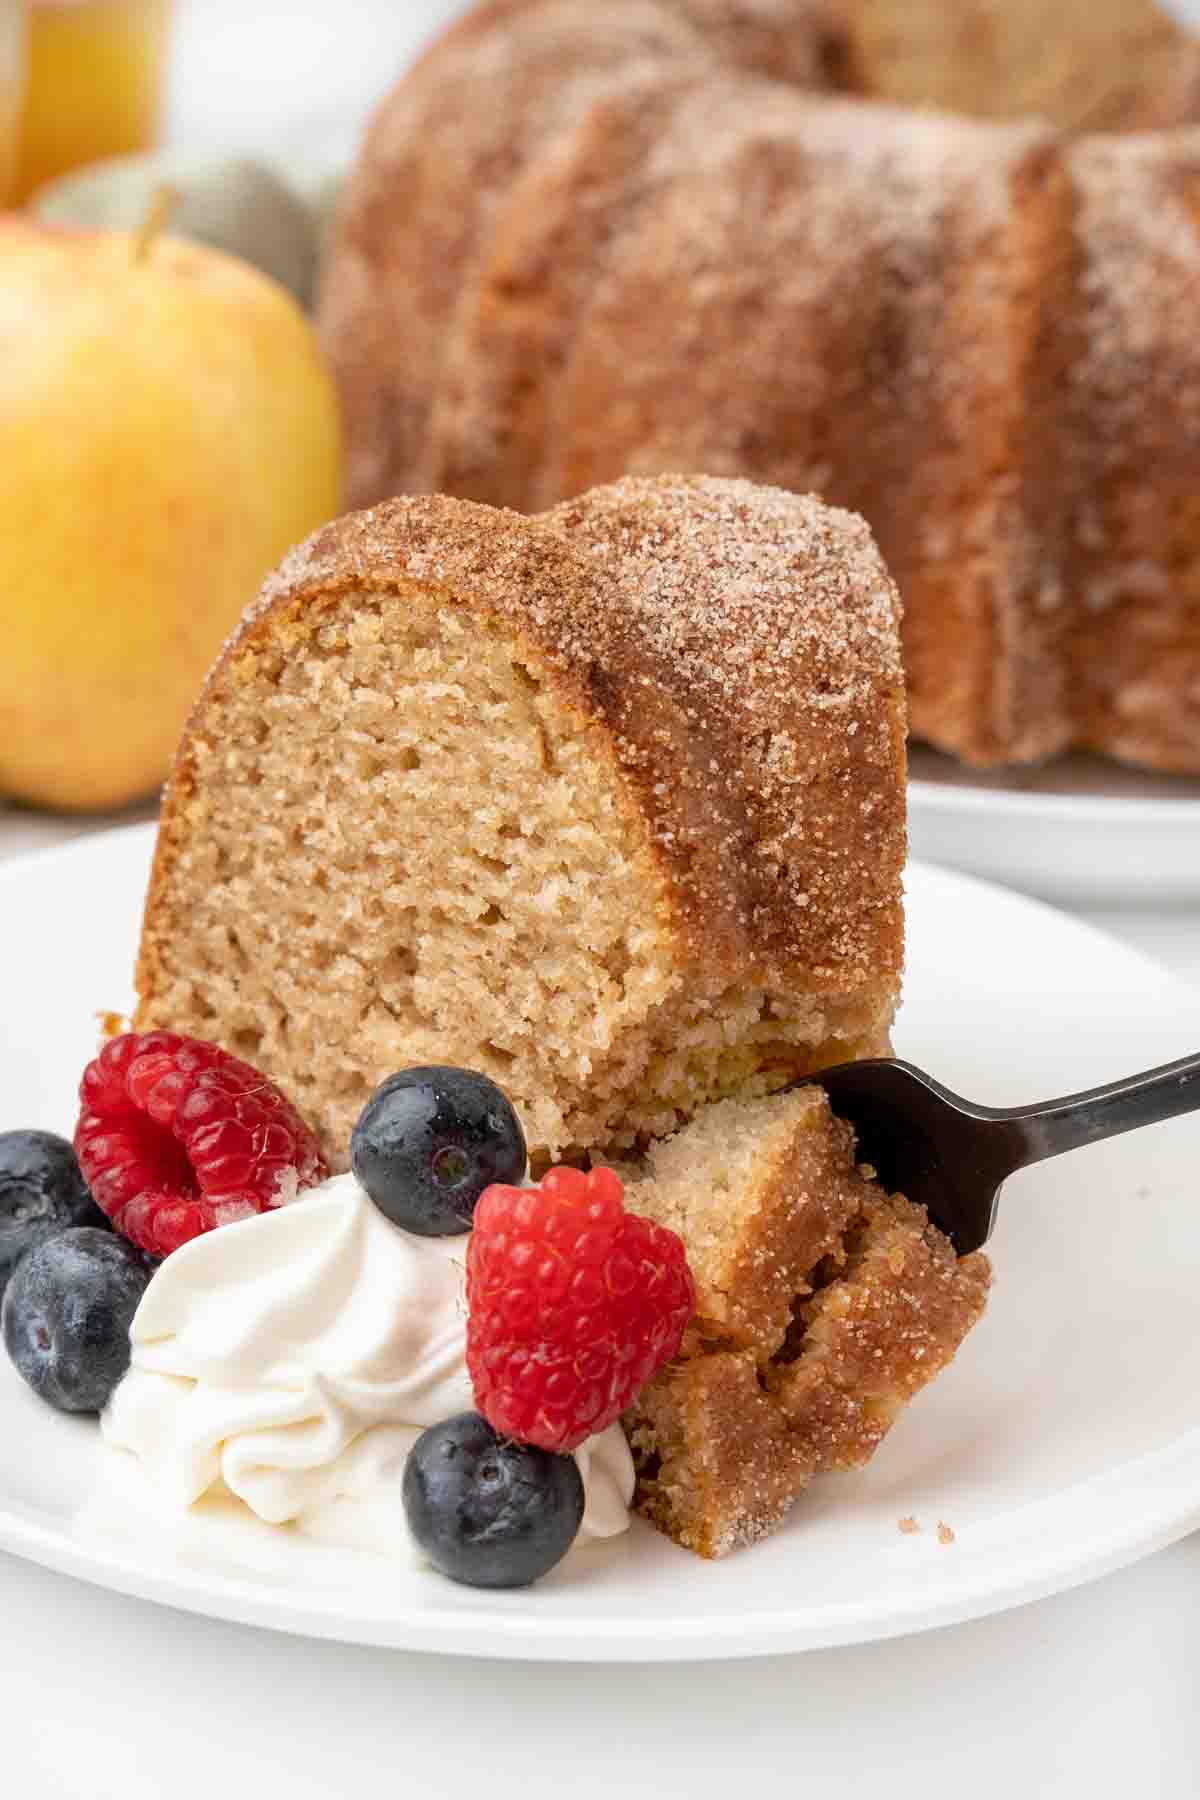 Apple cider bundt cake with whipped cream and berries on a white plate.